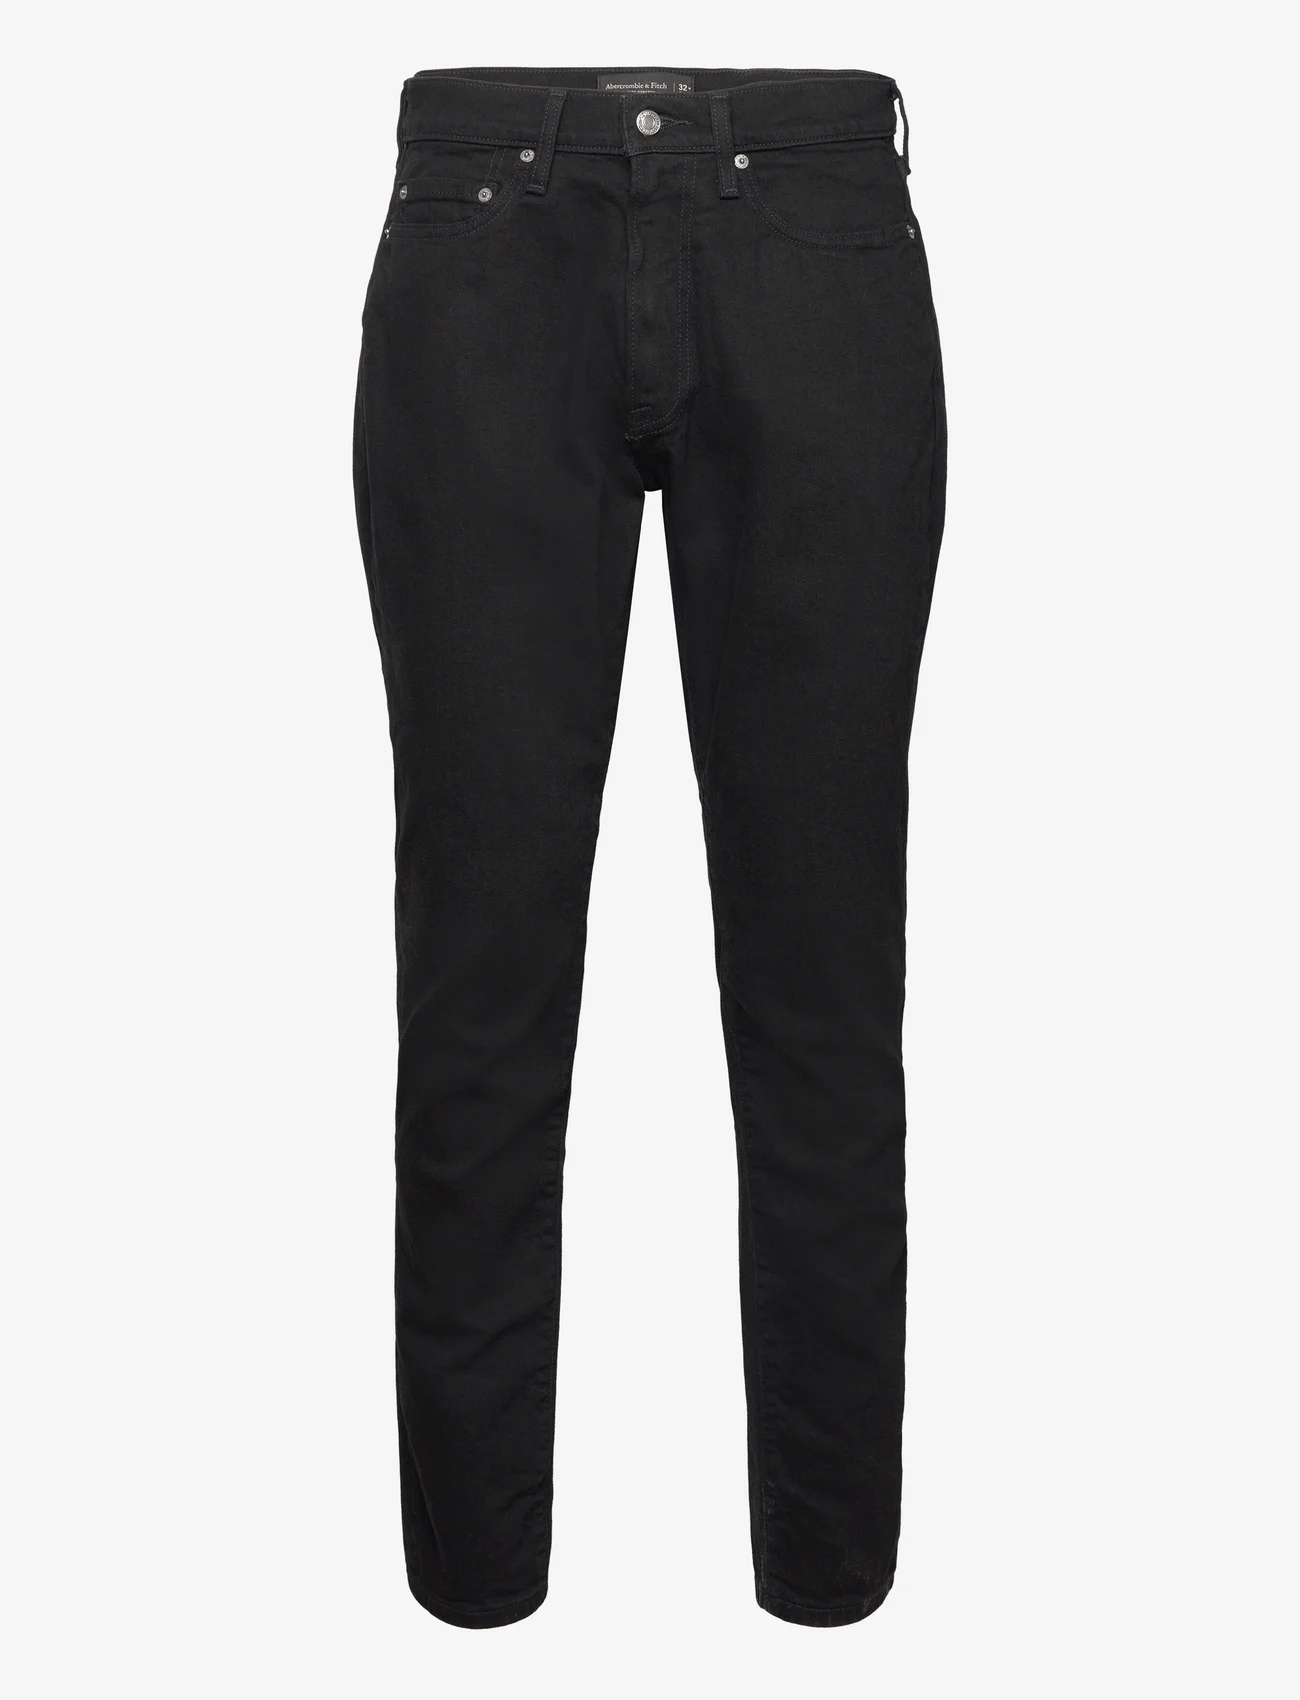 Abercrombie & Fitch - ANF MENS JEANS - slim fit jeans - ablack196 - saturated black wash - 0